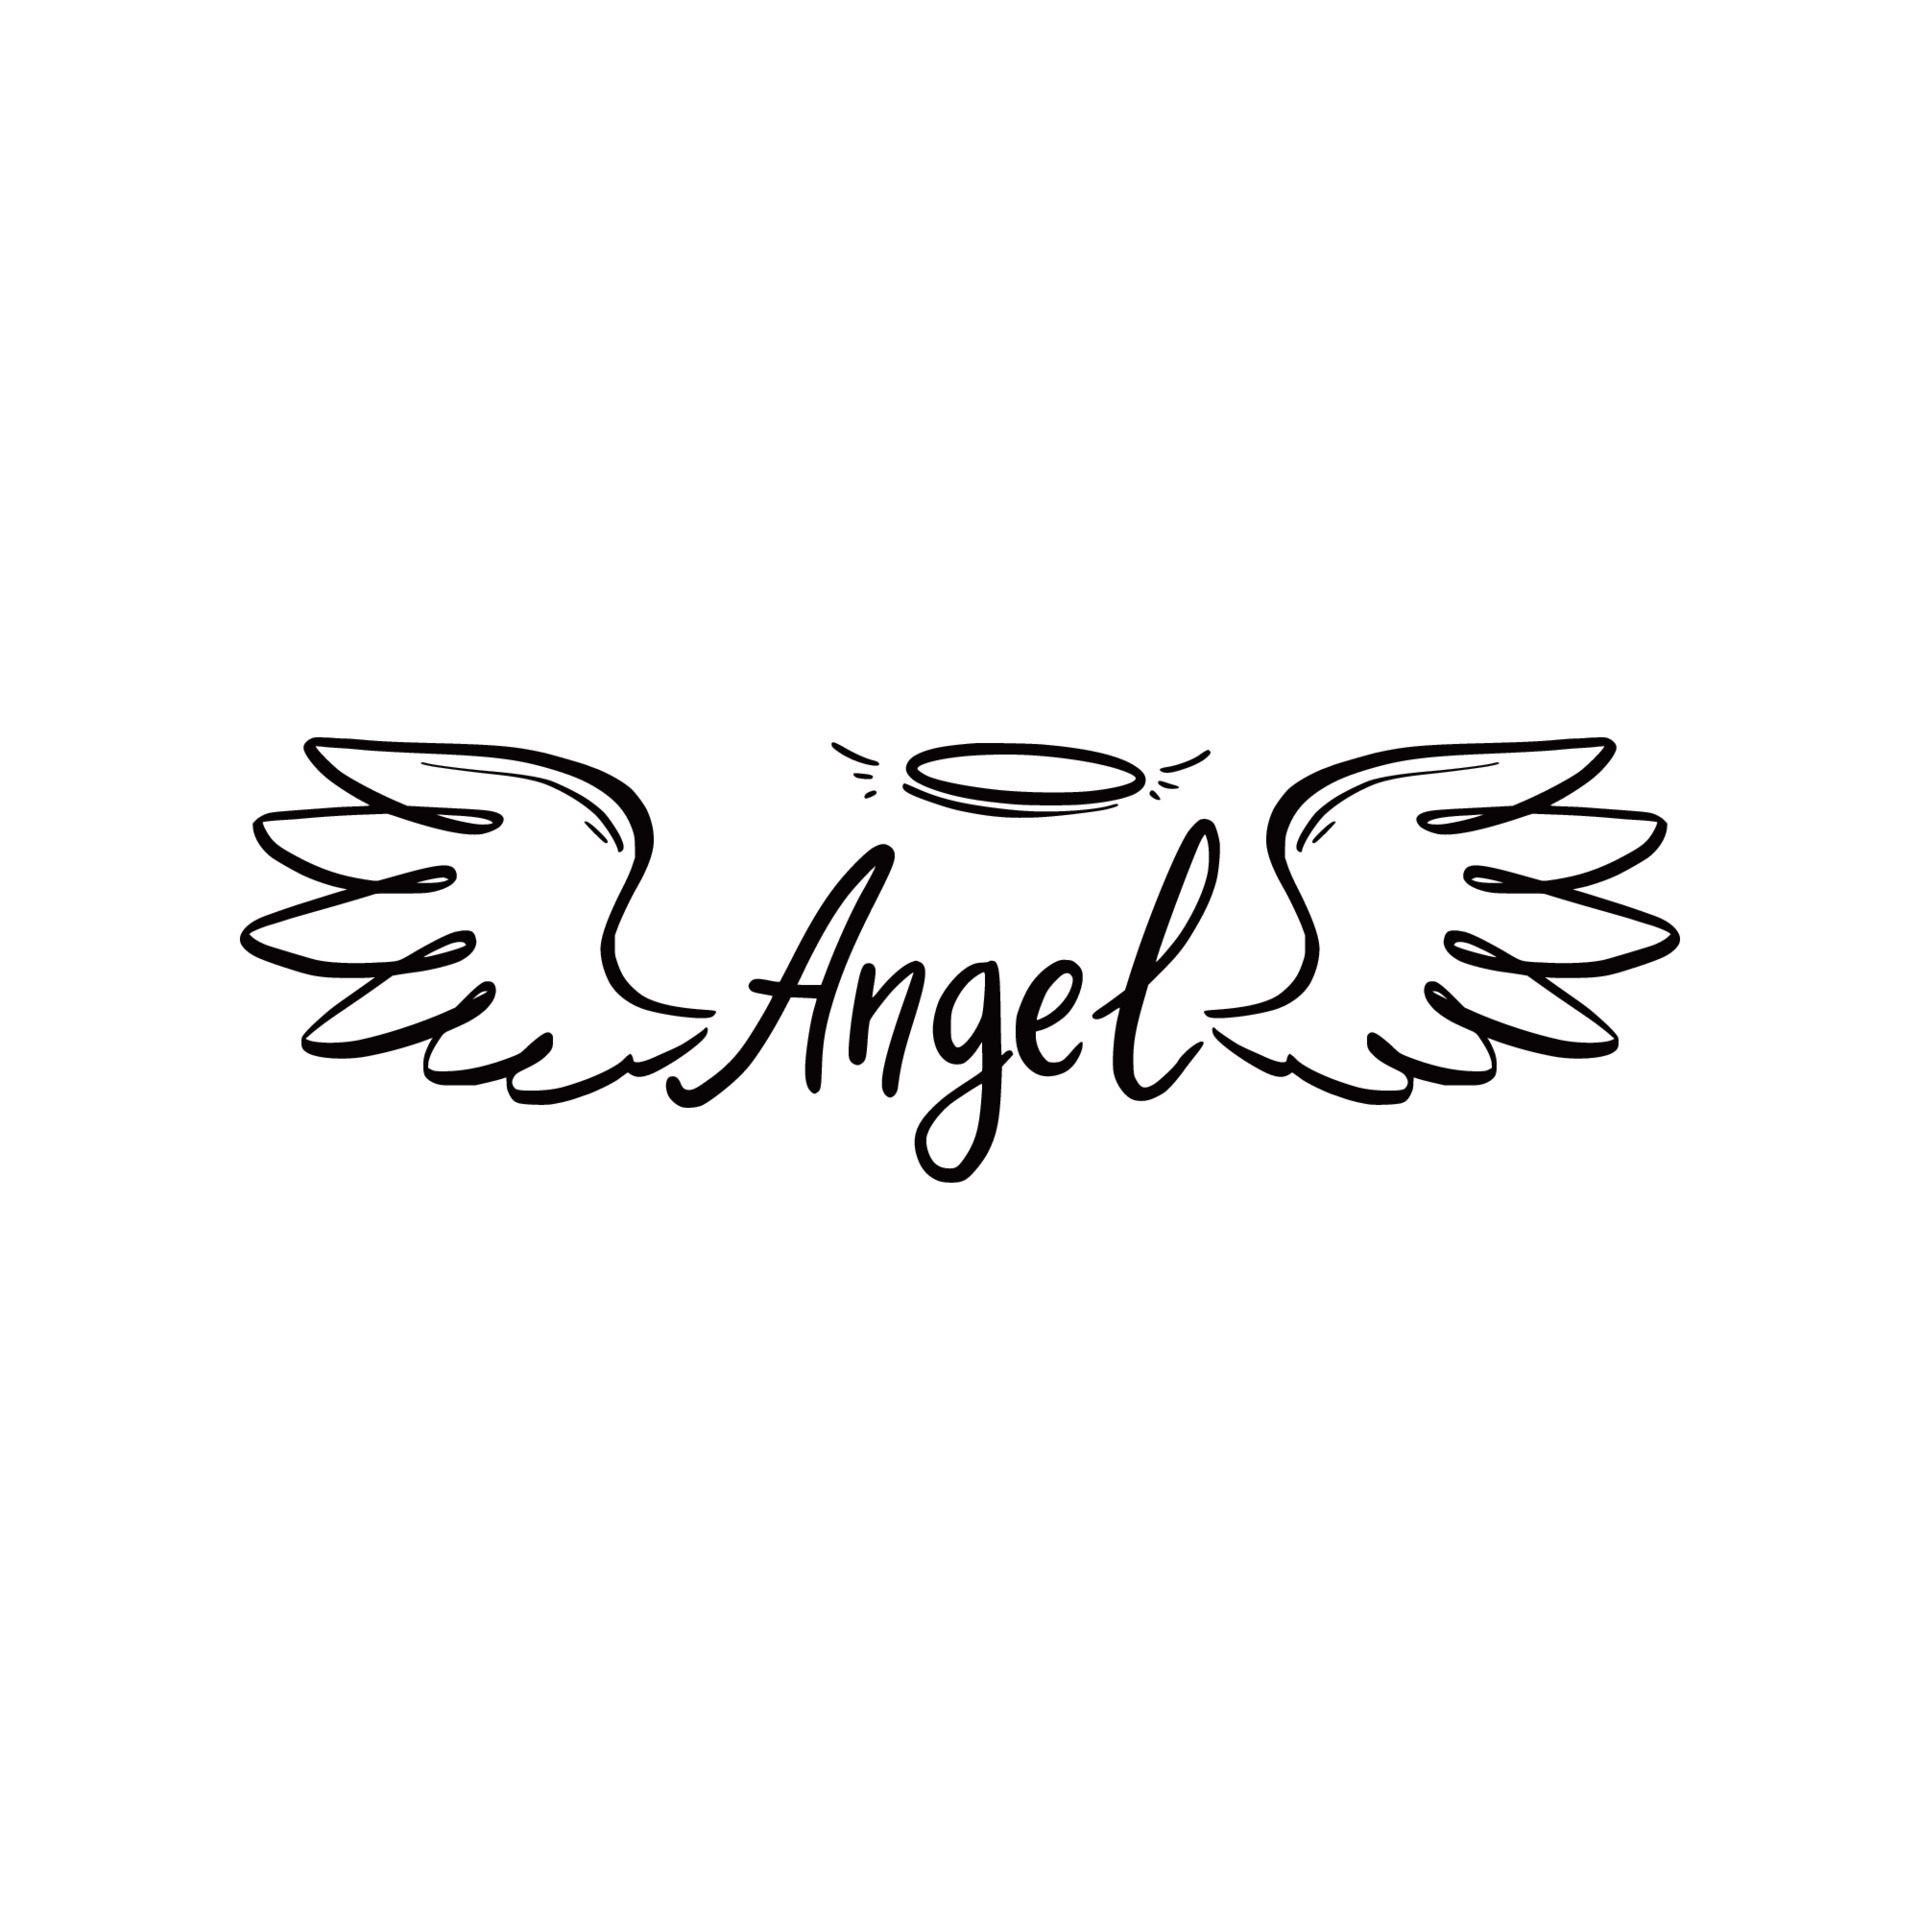 angel-wing-with-halo-and-angel-lettering-text-8348278-vector-art-at-vecteezy